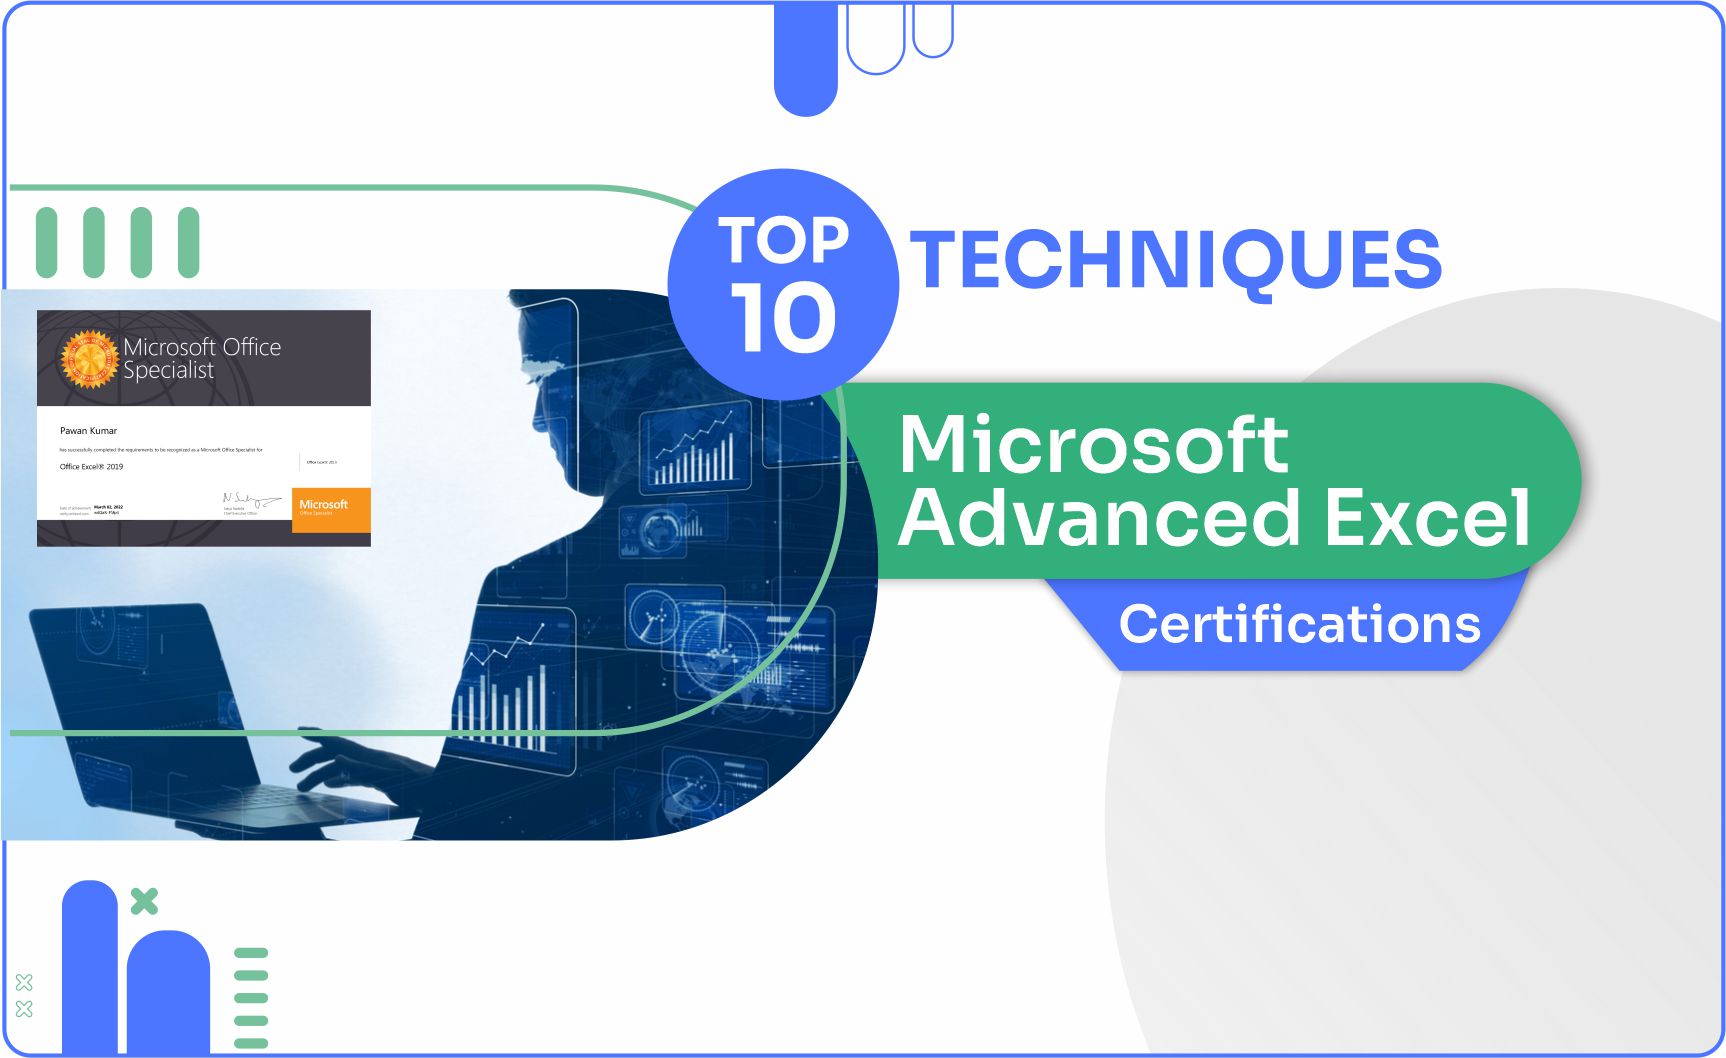 Top 10 Techniques to learn through the Microsoft Advanced Excel Certifications